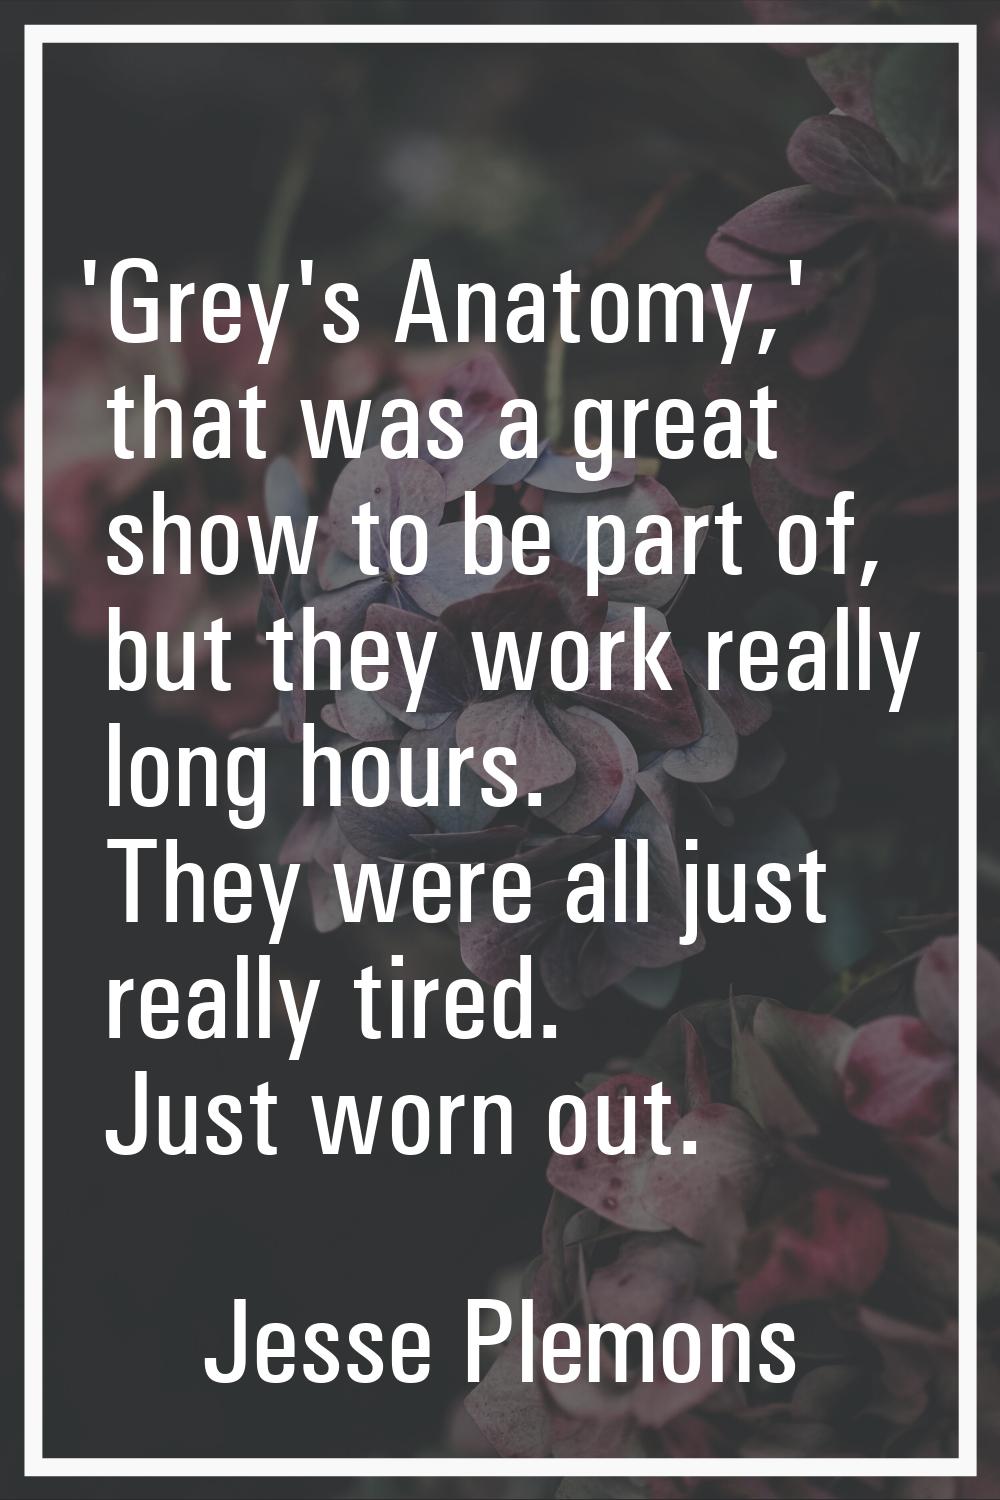 'Grey's Anatomy,' that was a great show to be part of, but they work really long hours. They were a